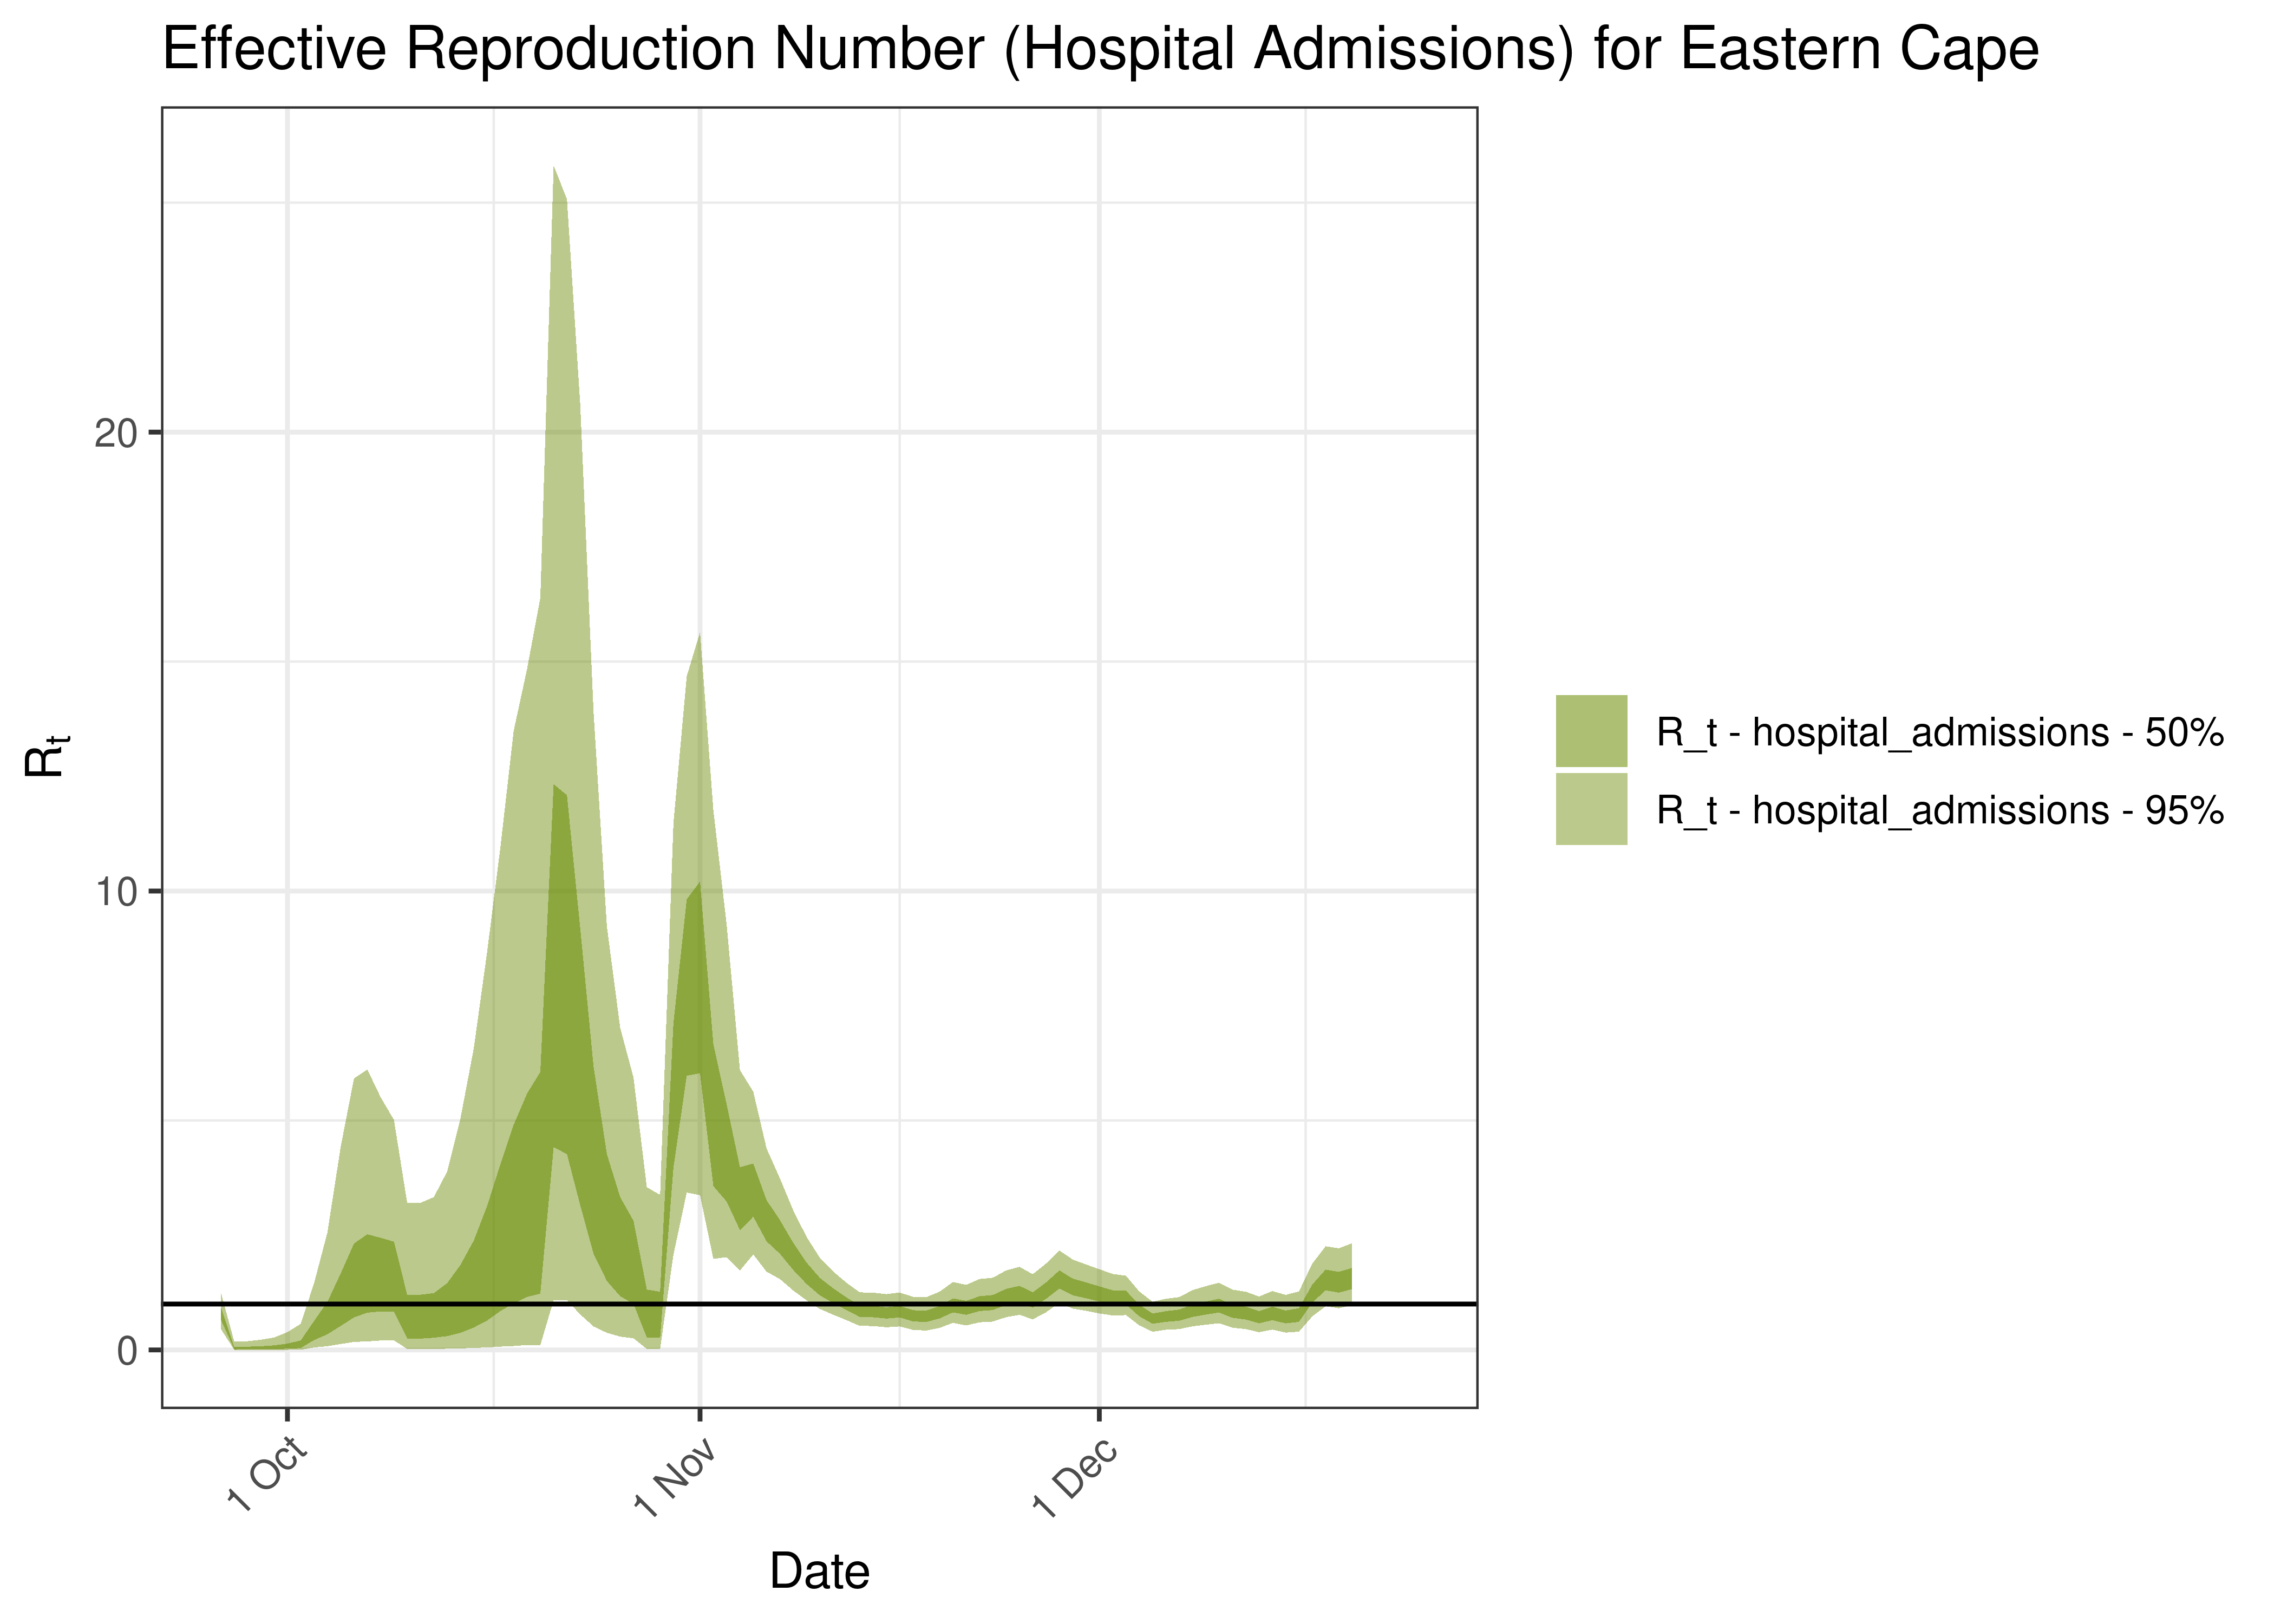 Estimated Effective Reproduction Number Based on Hospital Admissions for Eastern Cape over last 90 days